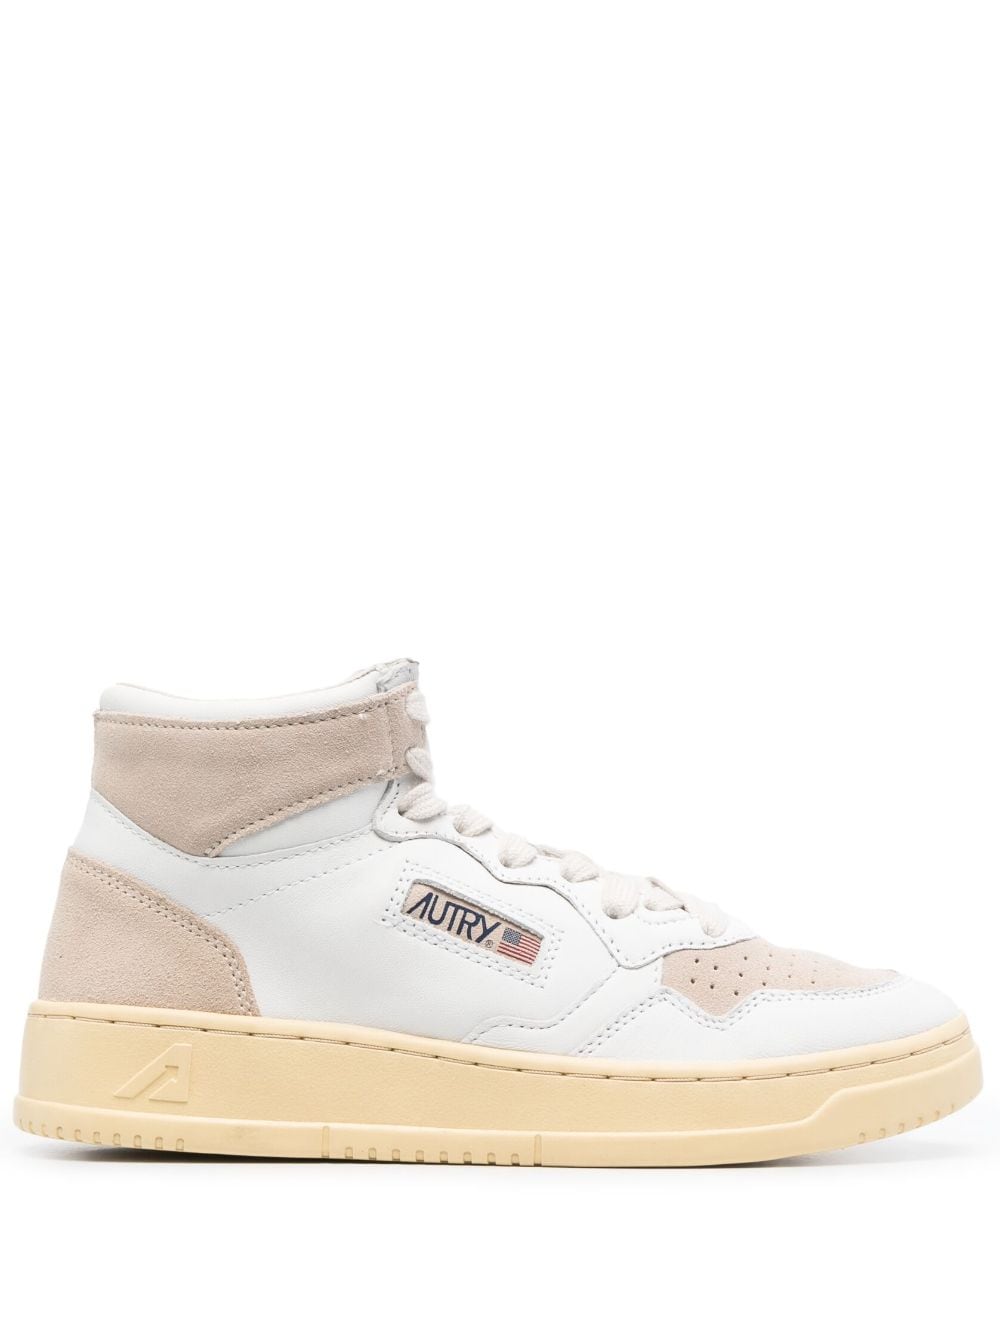 Autry Medalist high-top leather sneakers - White